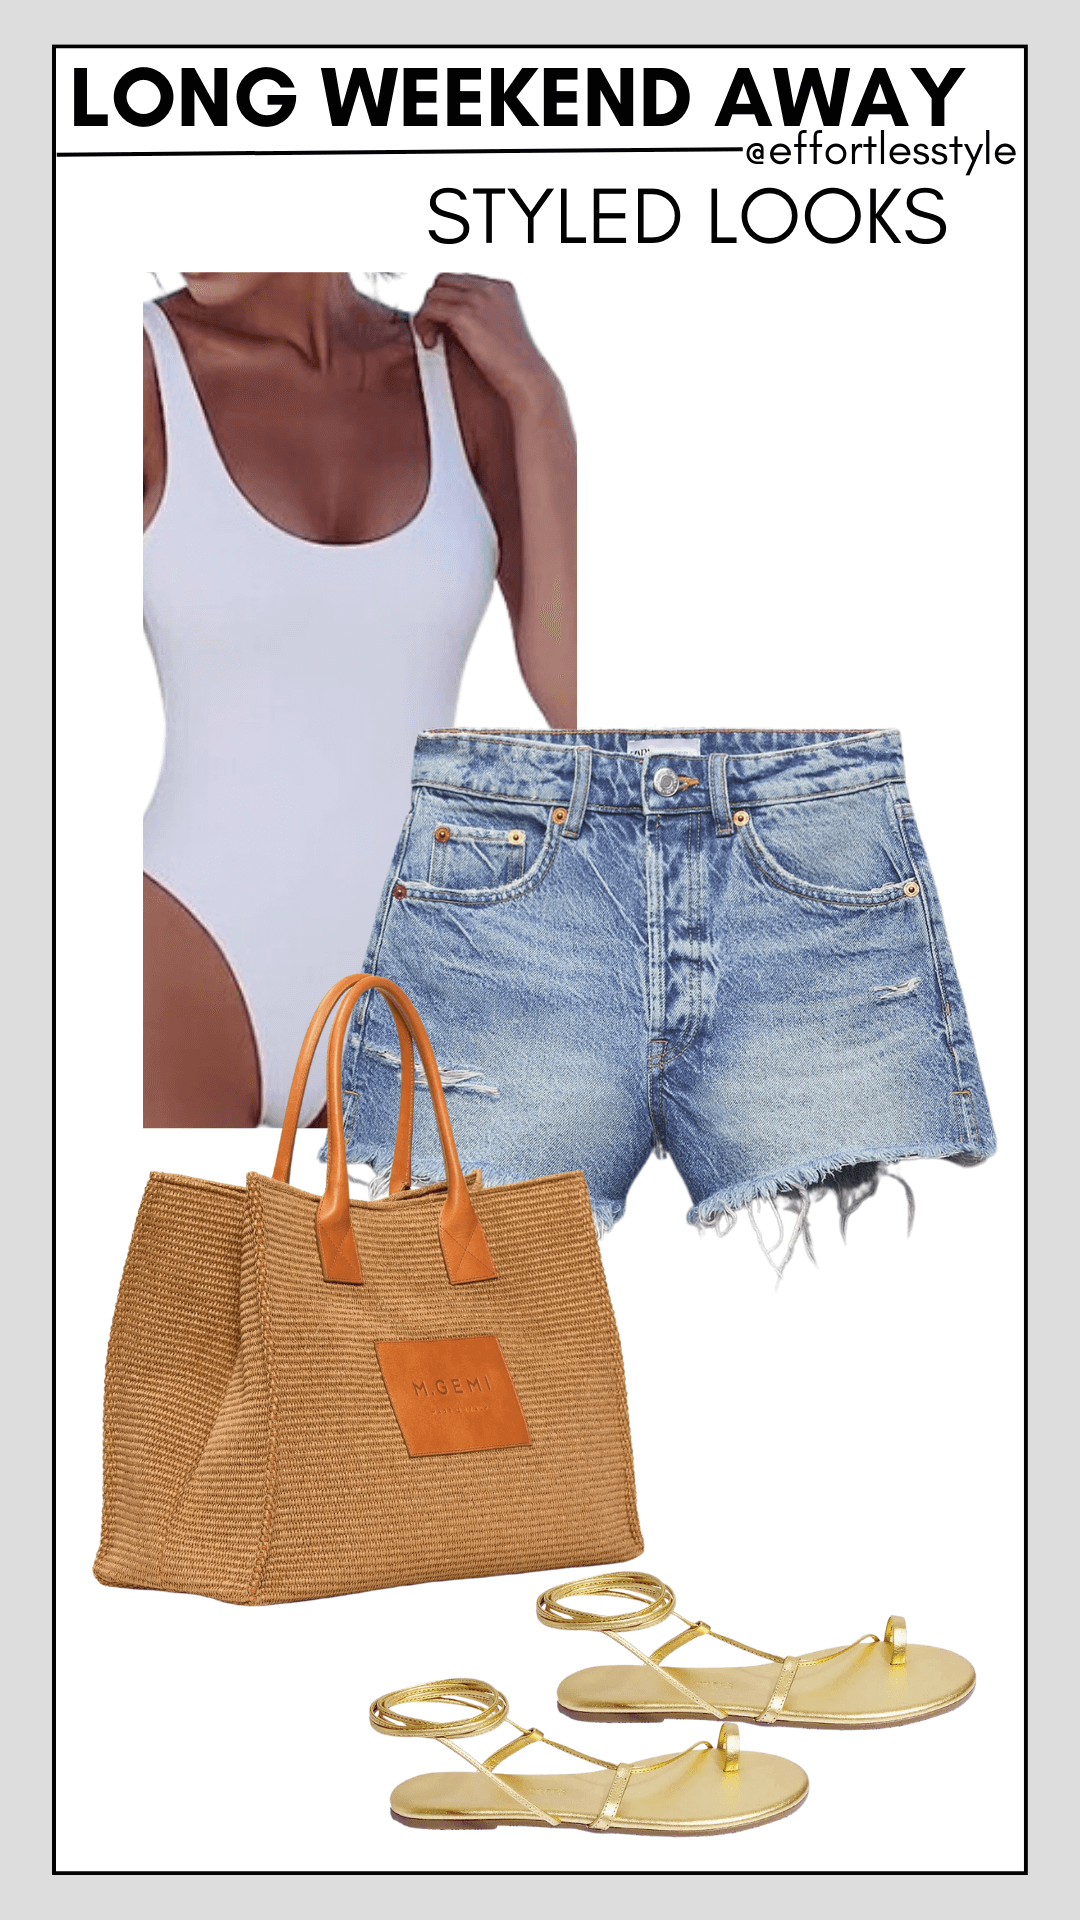 Long Weekend Travel Capsule One Piece Swimsuit & Denim Shorts how to wear denim shorts as a cover up how to wear jean shorts as a cover up how to style jean shorts for the beach how to wear jean shorts with your bathing suit how to wear jean shorts to the pool how to pack efficiently for a long weekend away versatile pieces for a quick weekend getaway how to maximize your suitcase for a weekend away